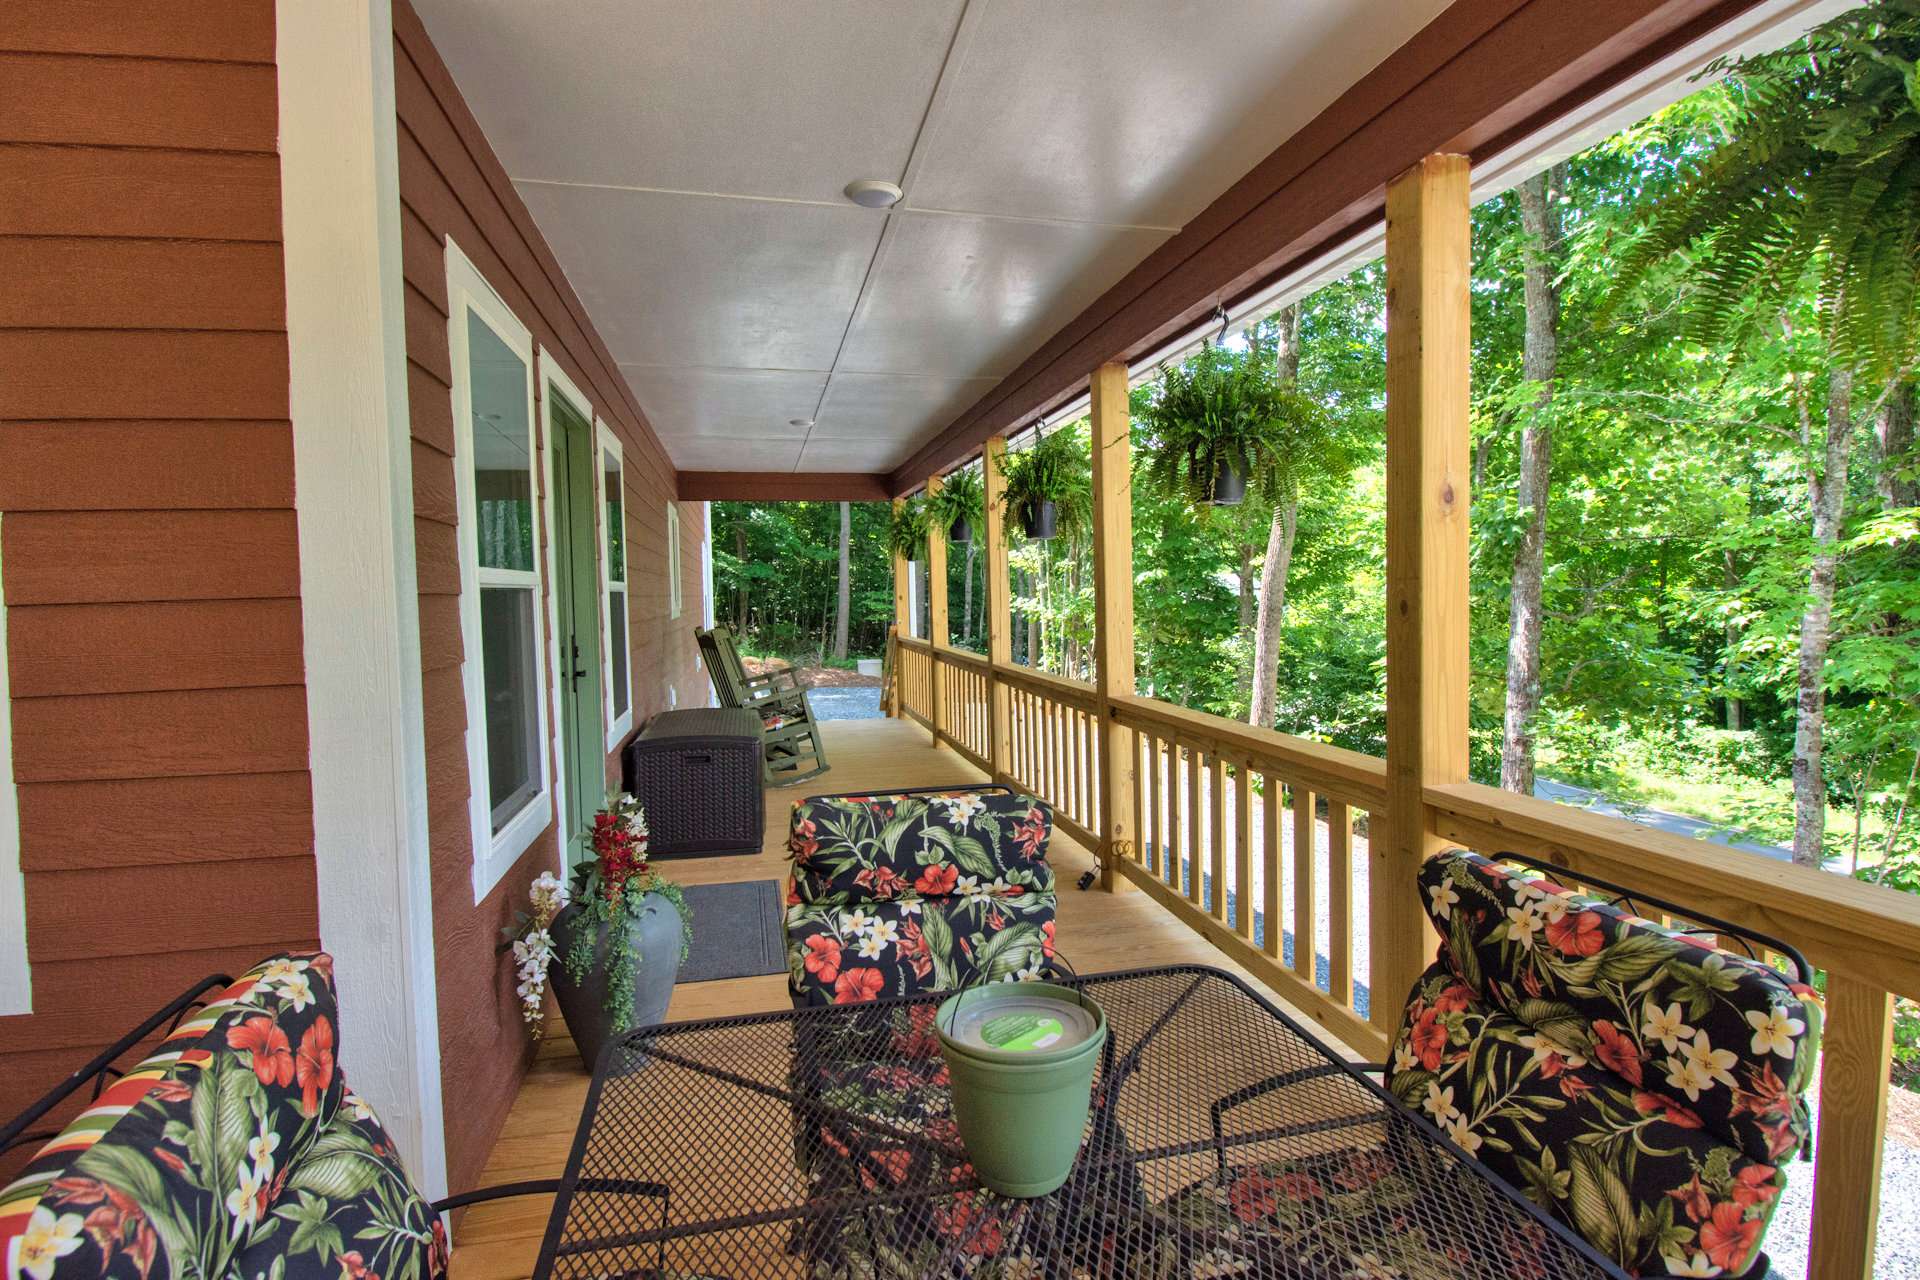 A wrap around covered porch gives this like-new 3-bedroom, 2.5-bath Southern Ashe County home a farmhouse look.  You will love spending time outdoors and entertaining during the warmer months.